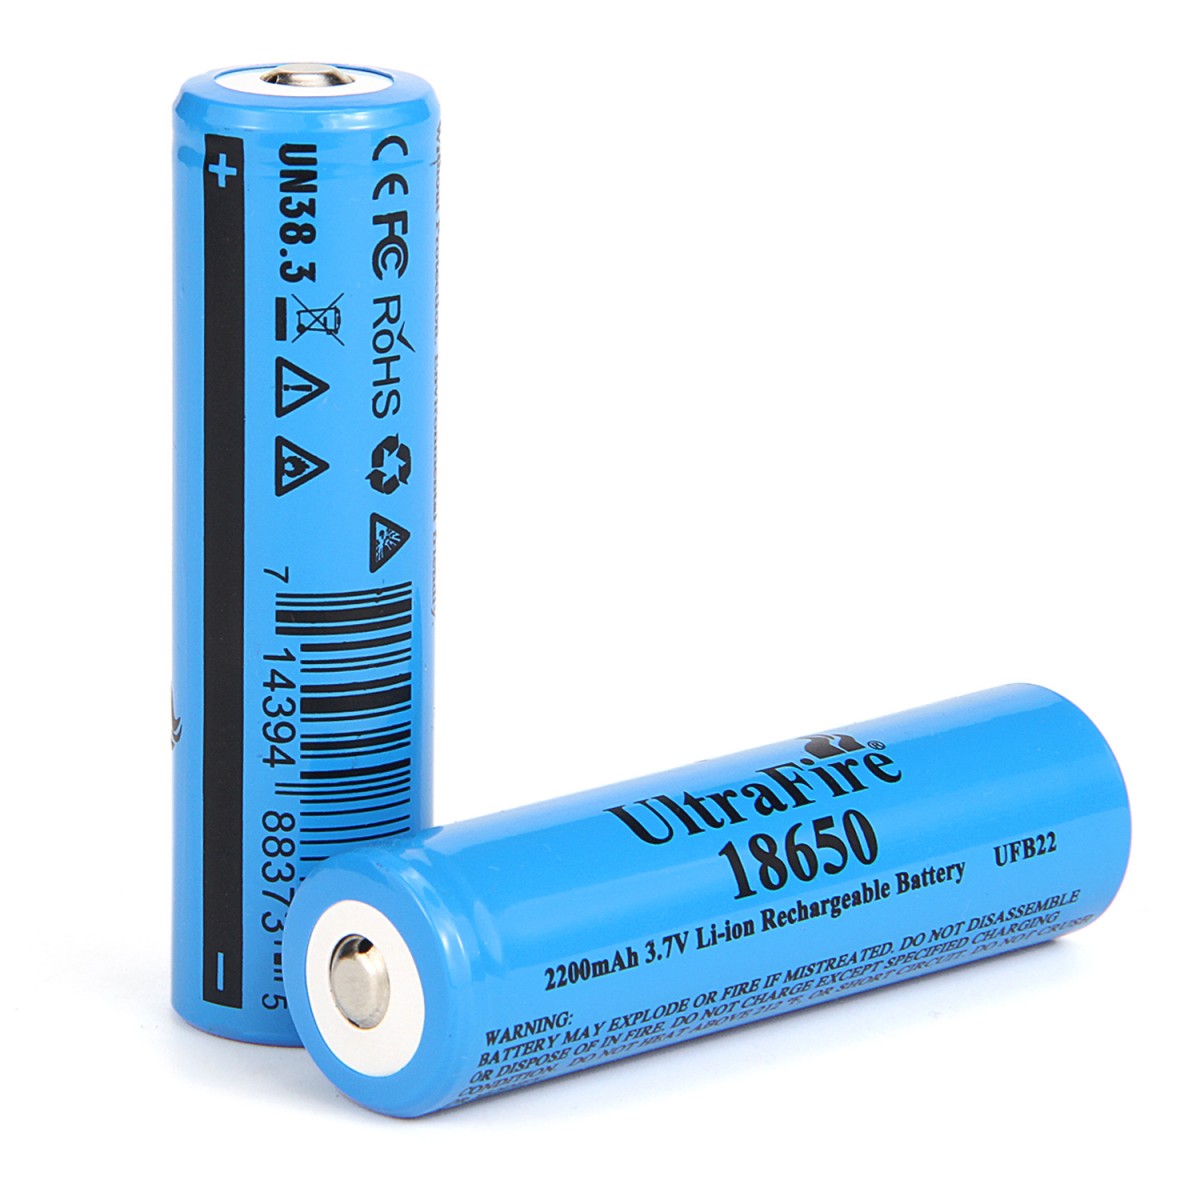 UltraFire 2200mAh 3.7V 18650 Rechargeable Li-ion Battery Without Protection Board (2PCS)